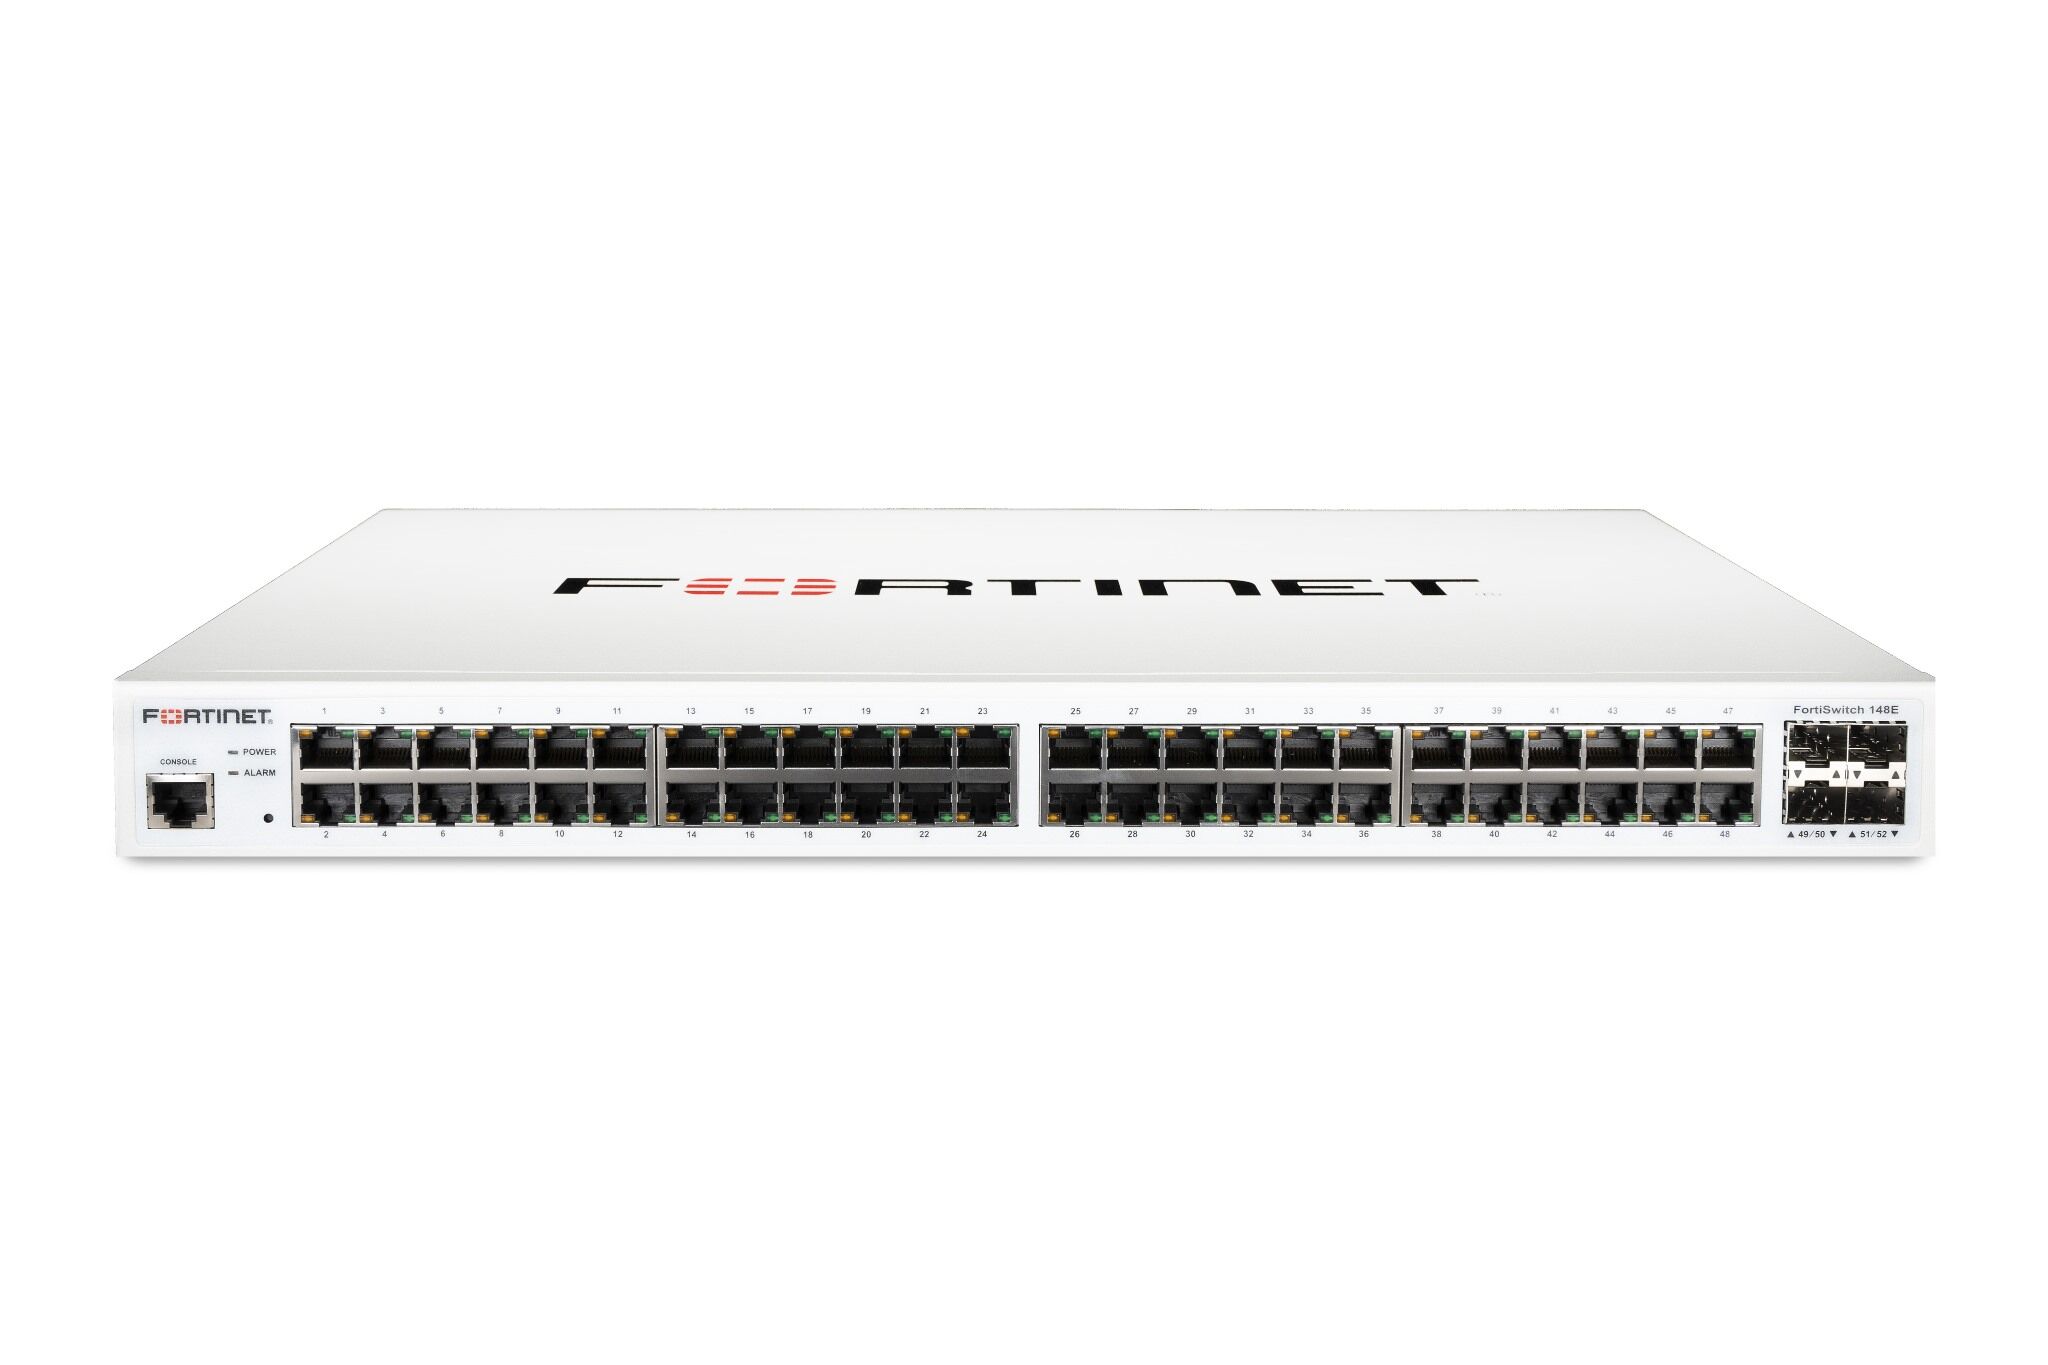 Fortinet FortiSwitch-148E